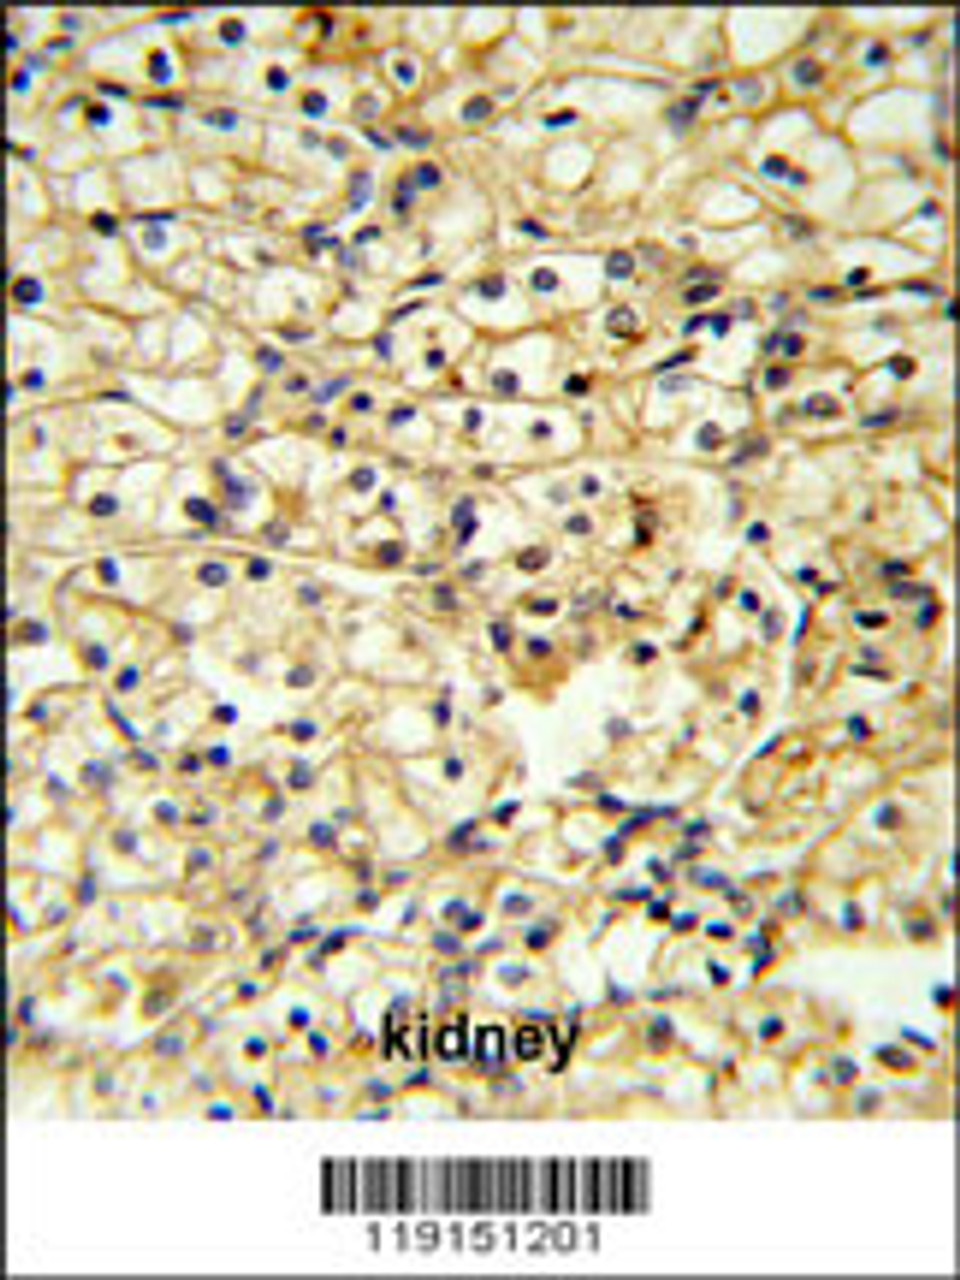 TRAP Antibody IHC analysis in formalin fixed and paraffin embedded kidney carcinoma followed by peroxidase conjugation of the secondary antibody and DAB staining.